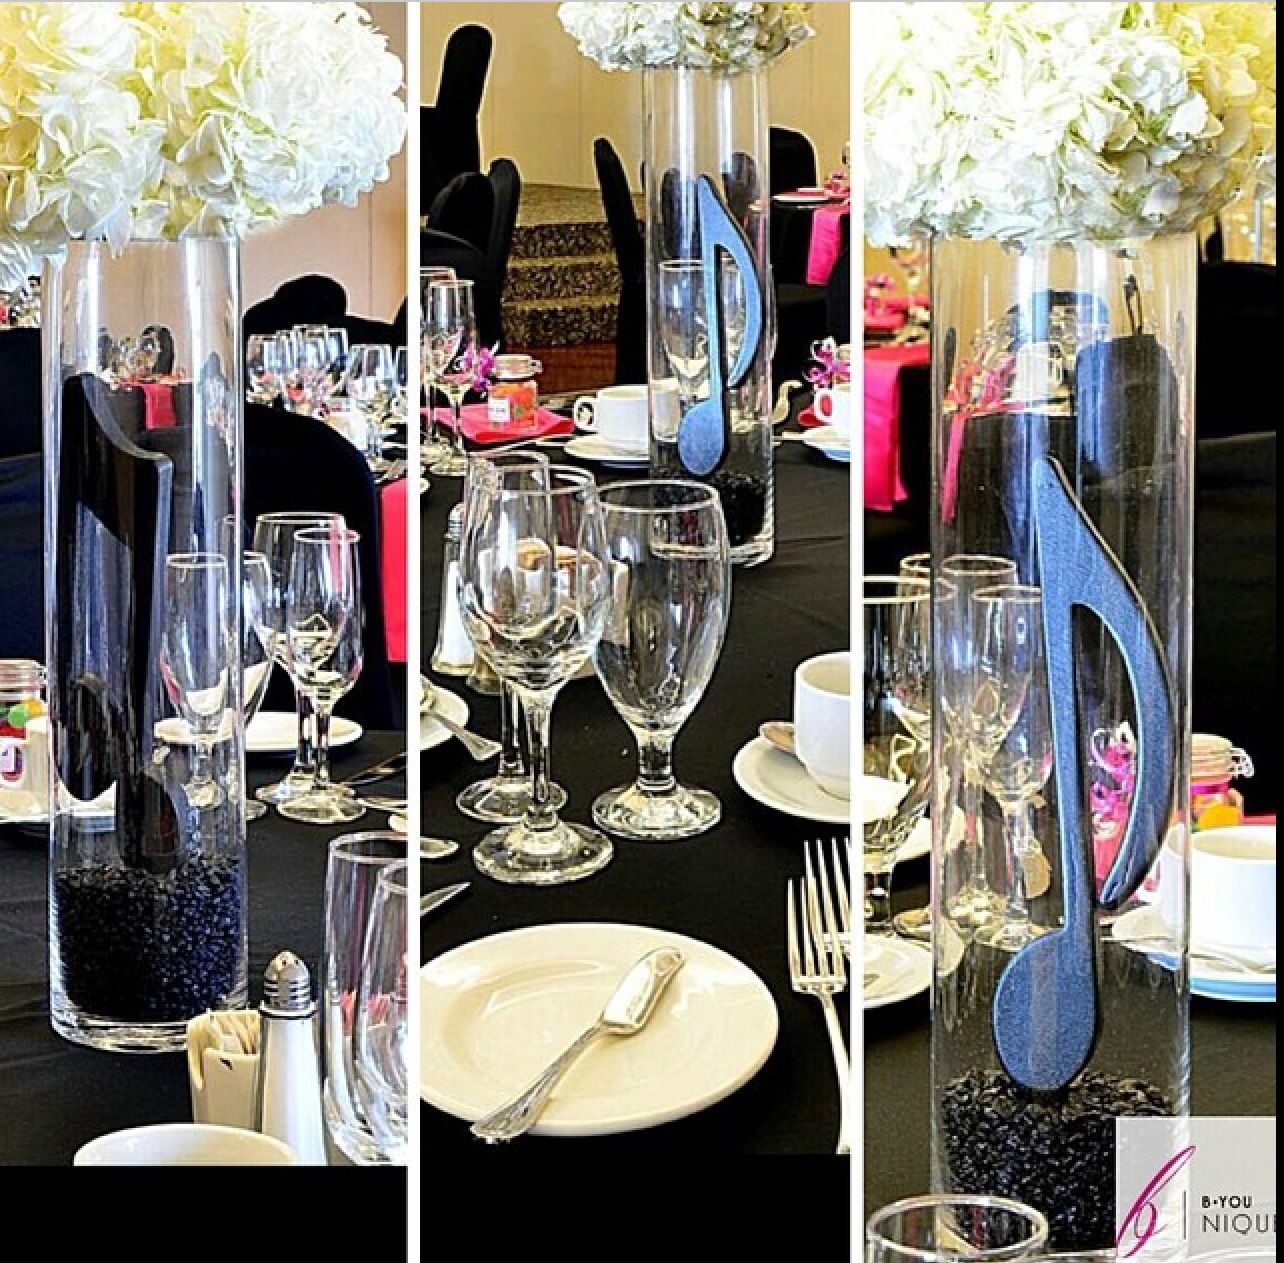 27 Unique Music Note Vase 2024 free download music note vase of our musical note centrepieces from our clients wedding follow us intended for our musical note centrepieces from our clients wedding follow us on ig byouniqueevents